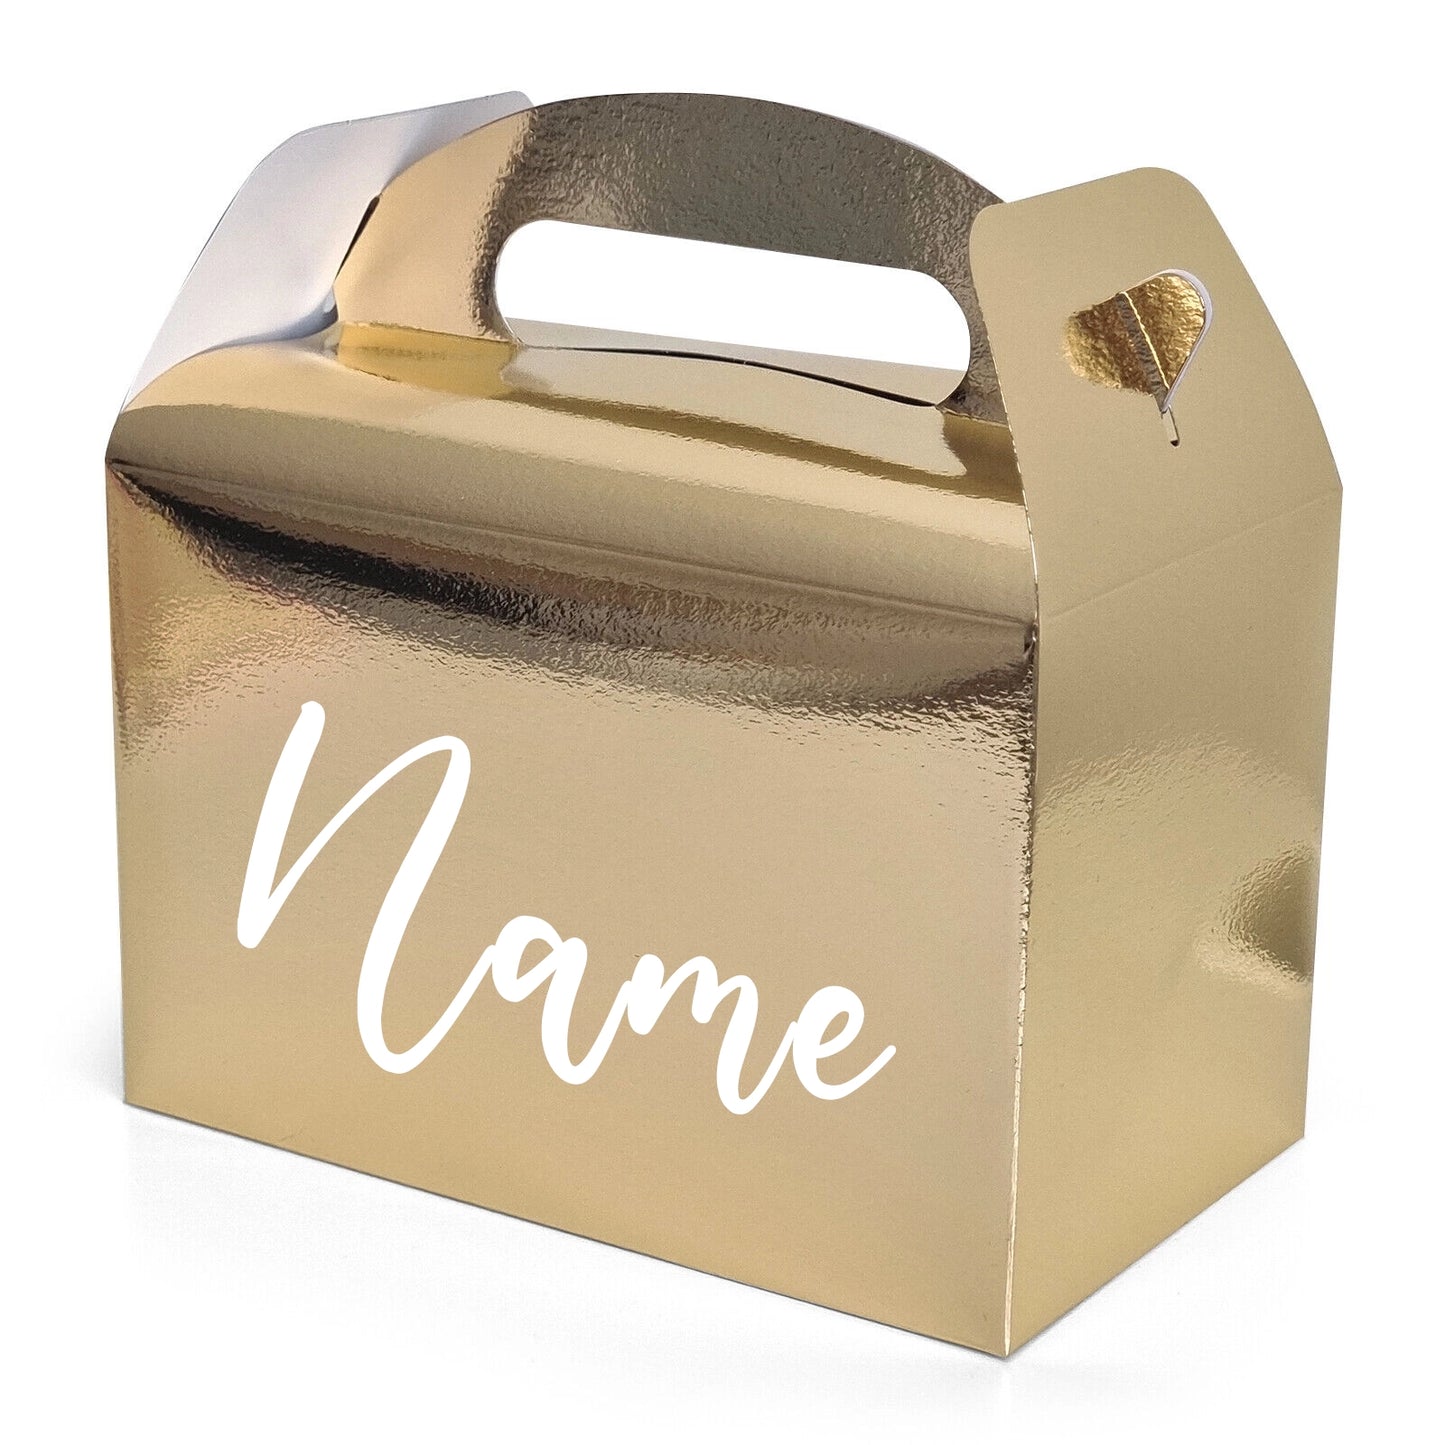 Personalised Party Boxes Gift Loot Box Any Name - Gold Boxes